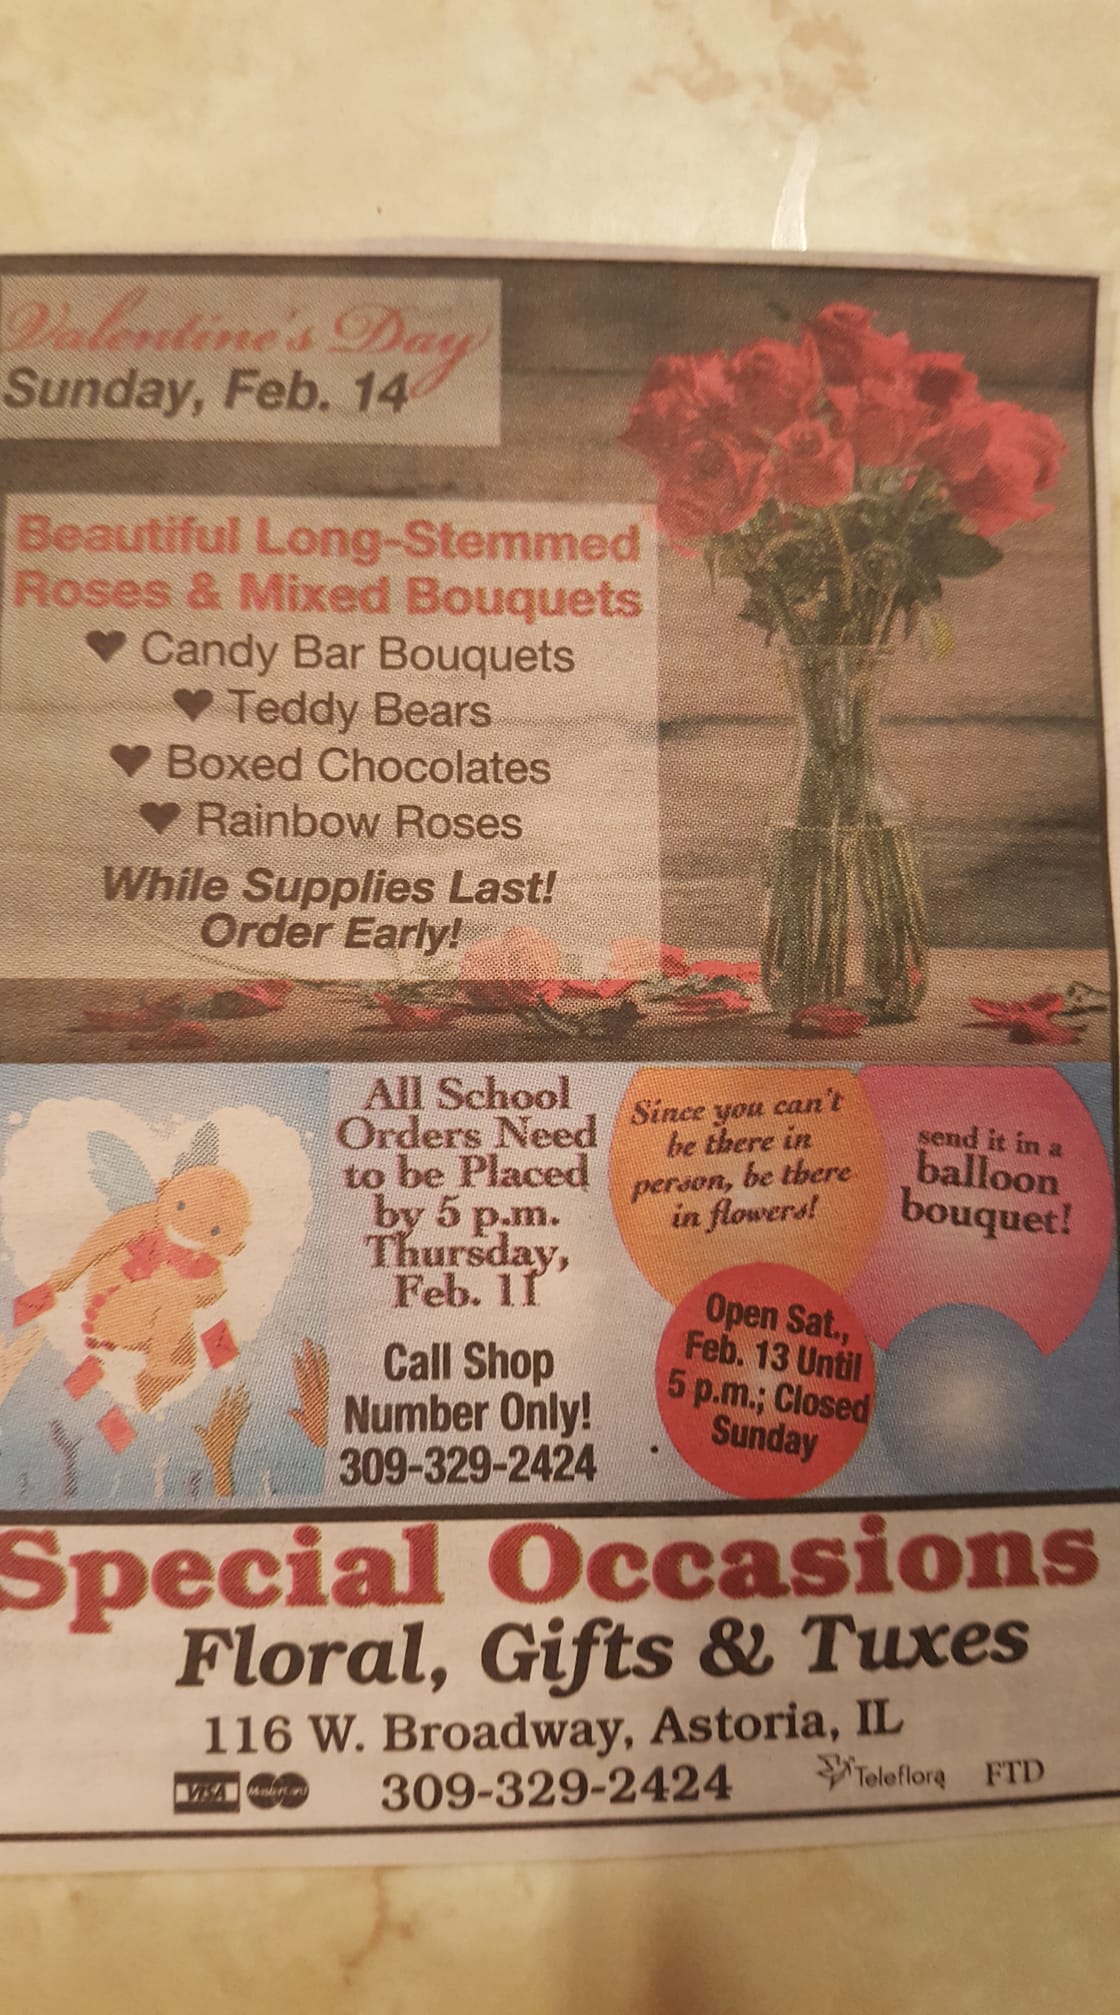 Special Occasions Flowers & Gifts 116 W Broadway, Astoria Illinois 61501